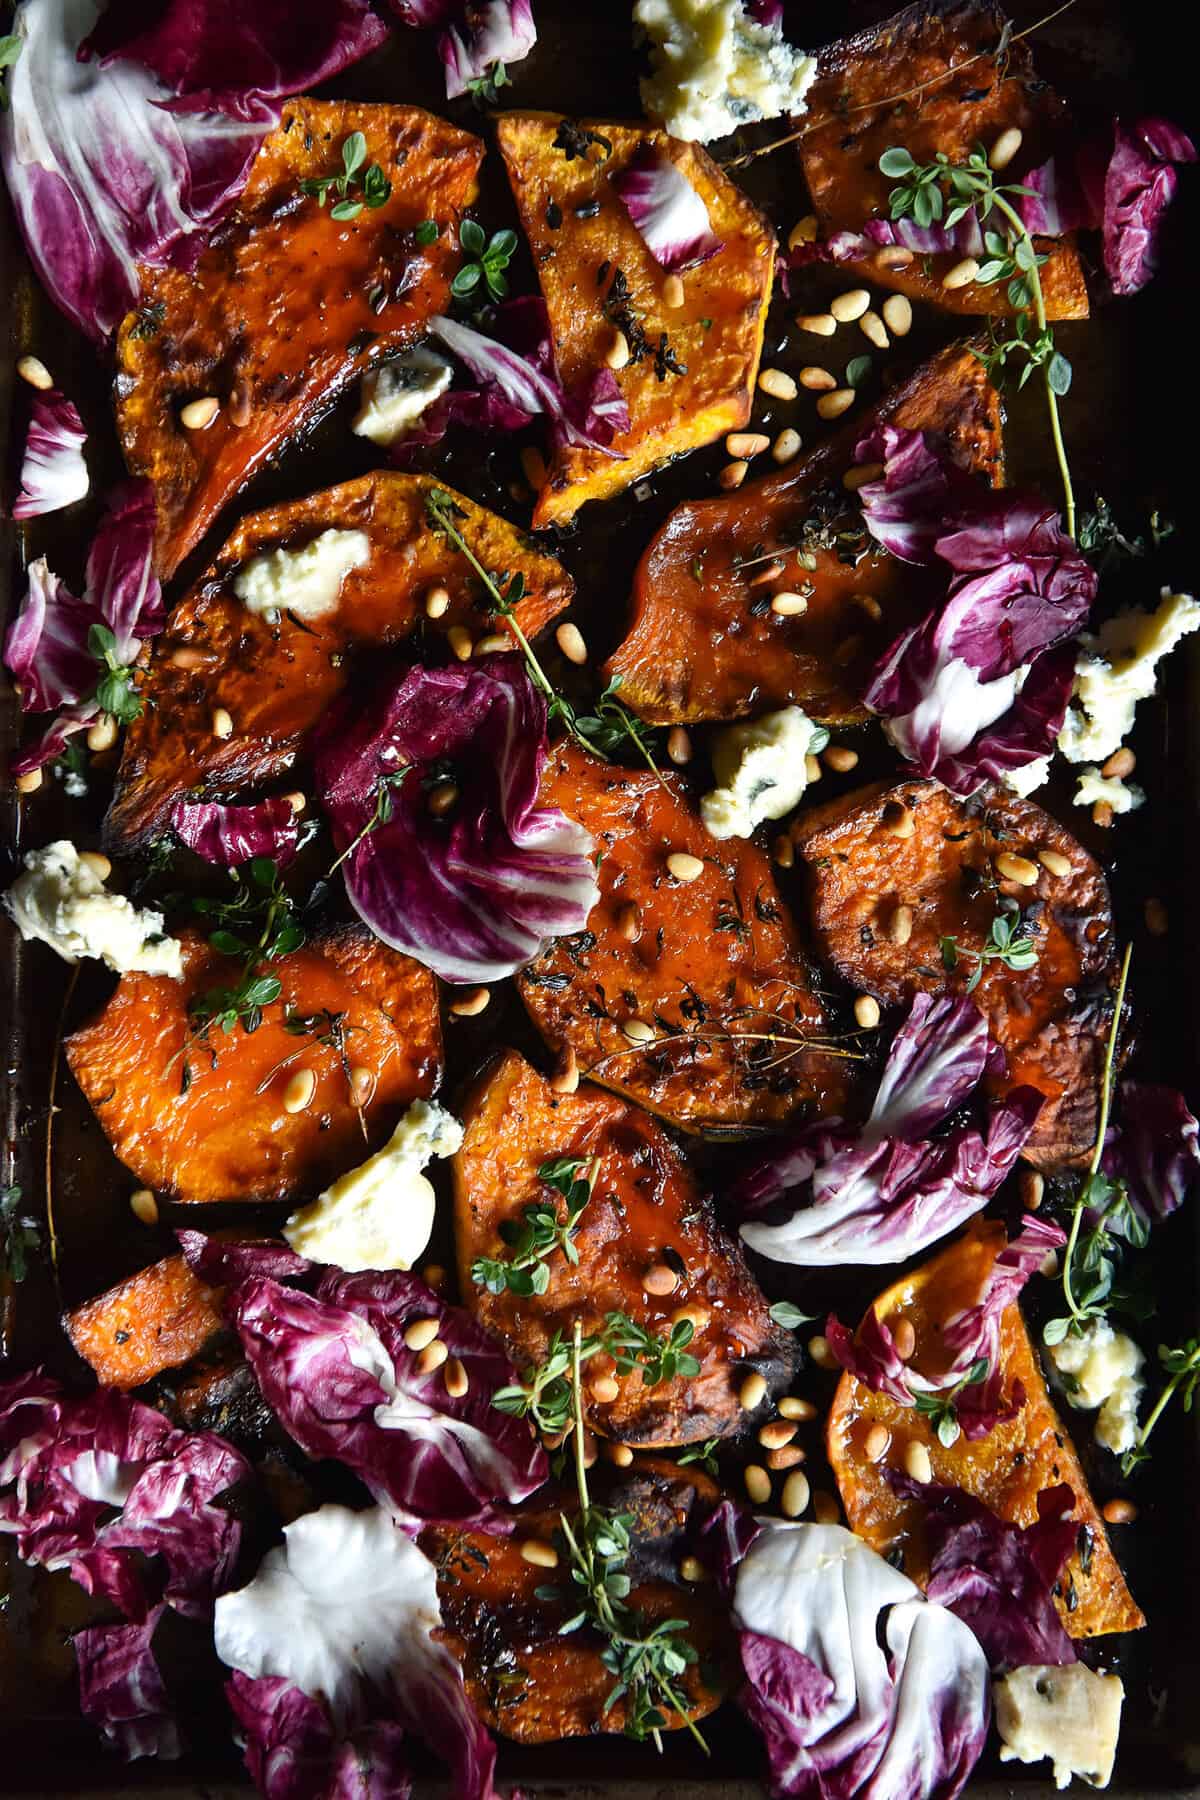 Honey and lemon thyme roasted pumpkin with blue cheese, radicchio and toasted pine nuts from www.georgeats.com. Gluten free, FODMAP friendly and vegetarian.